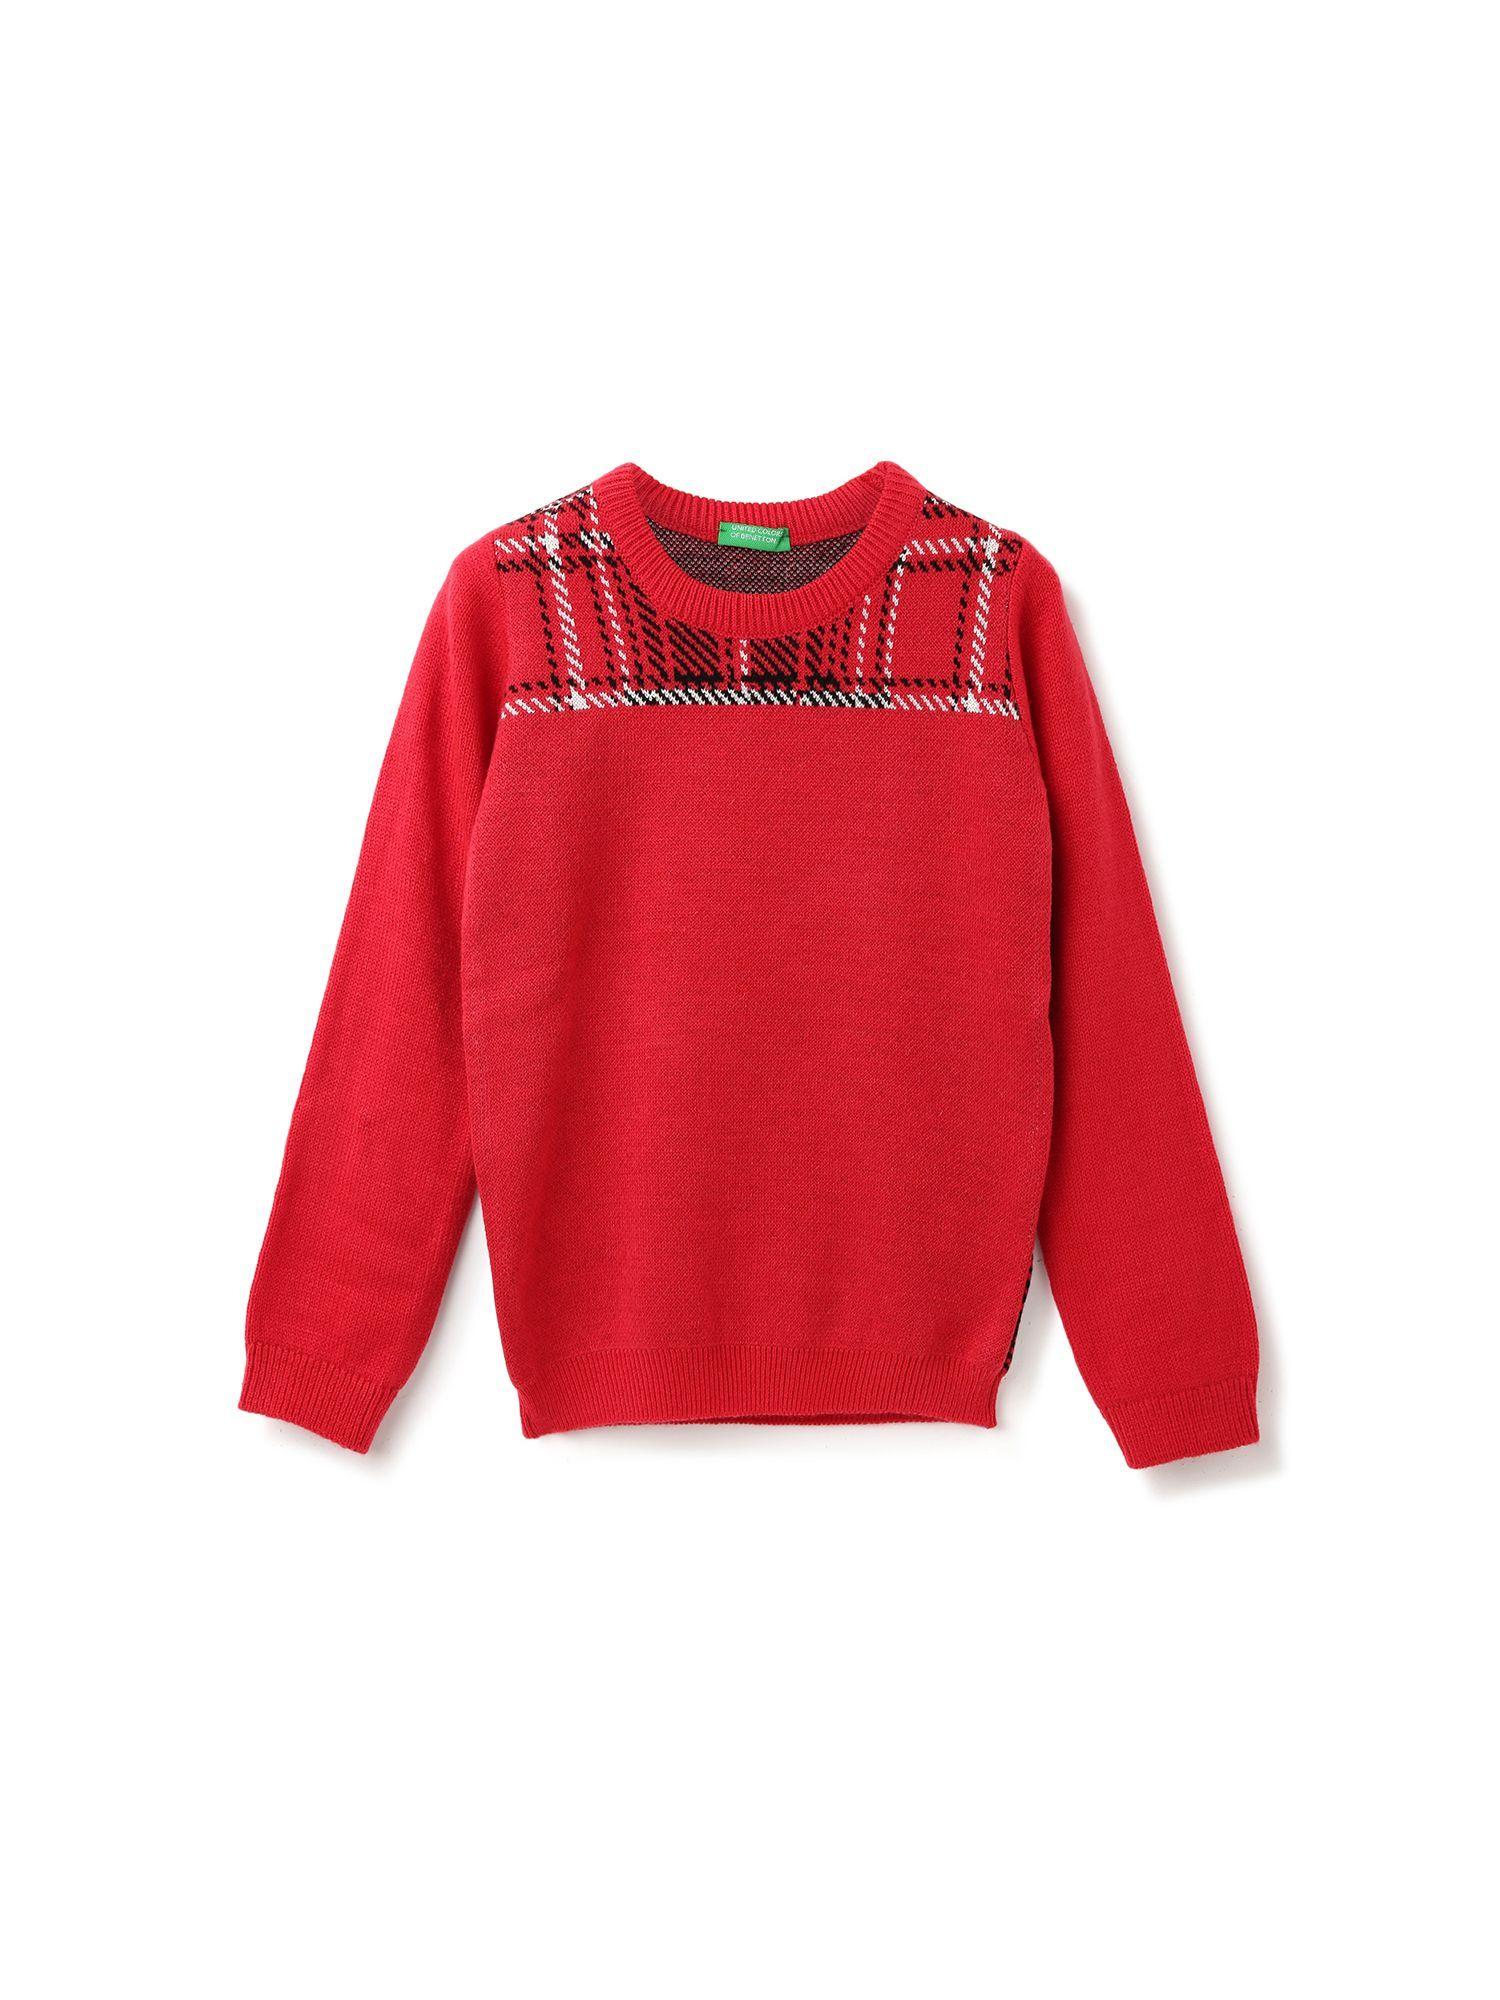 boys-red-checked-round-neck-sweater